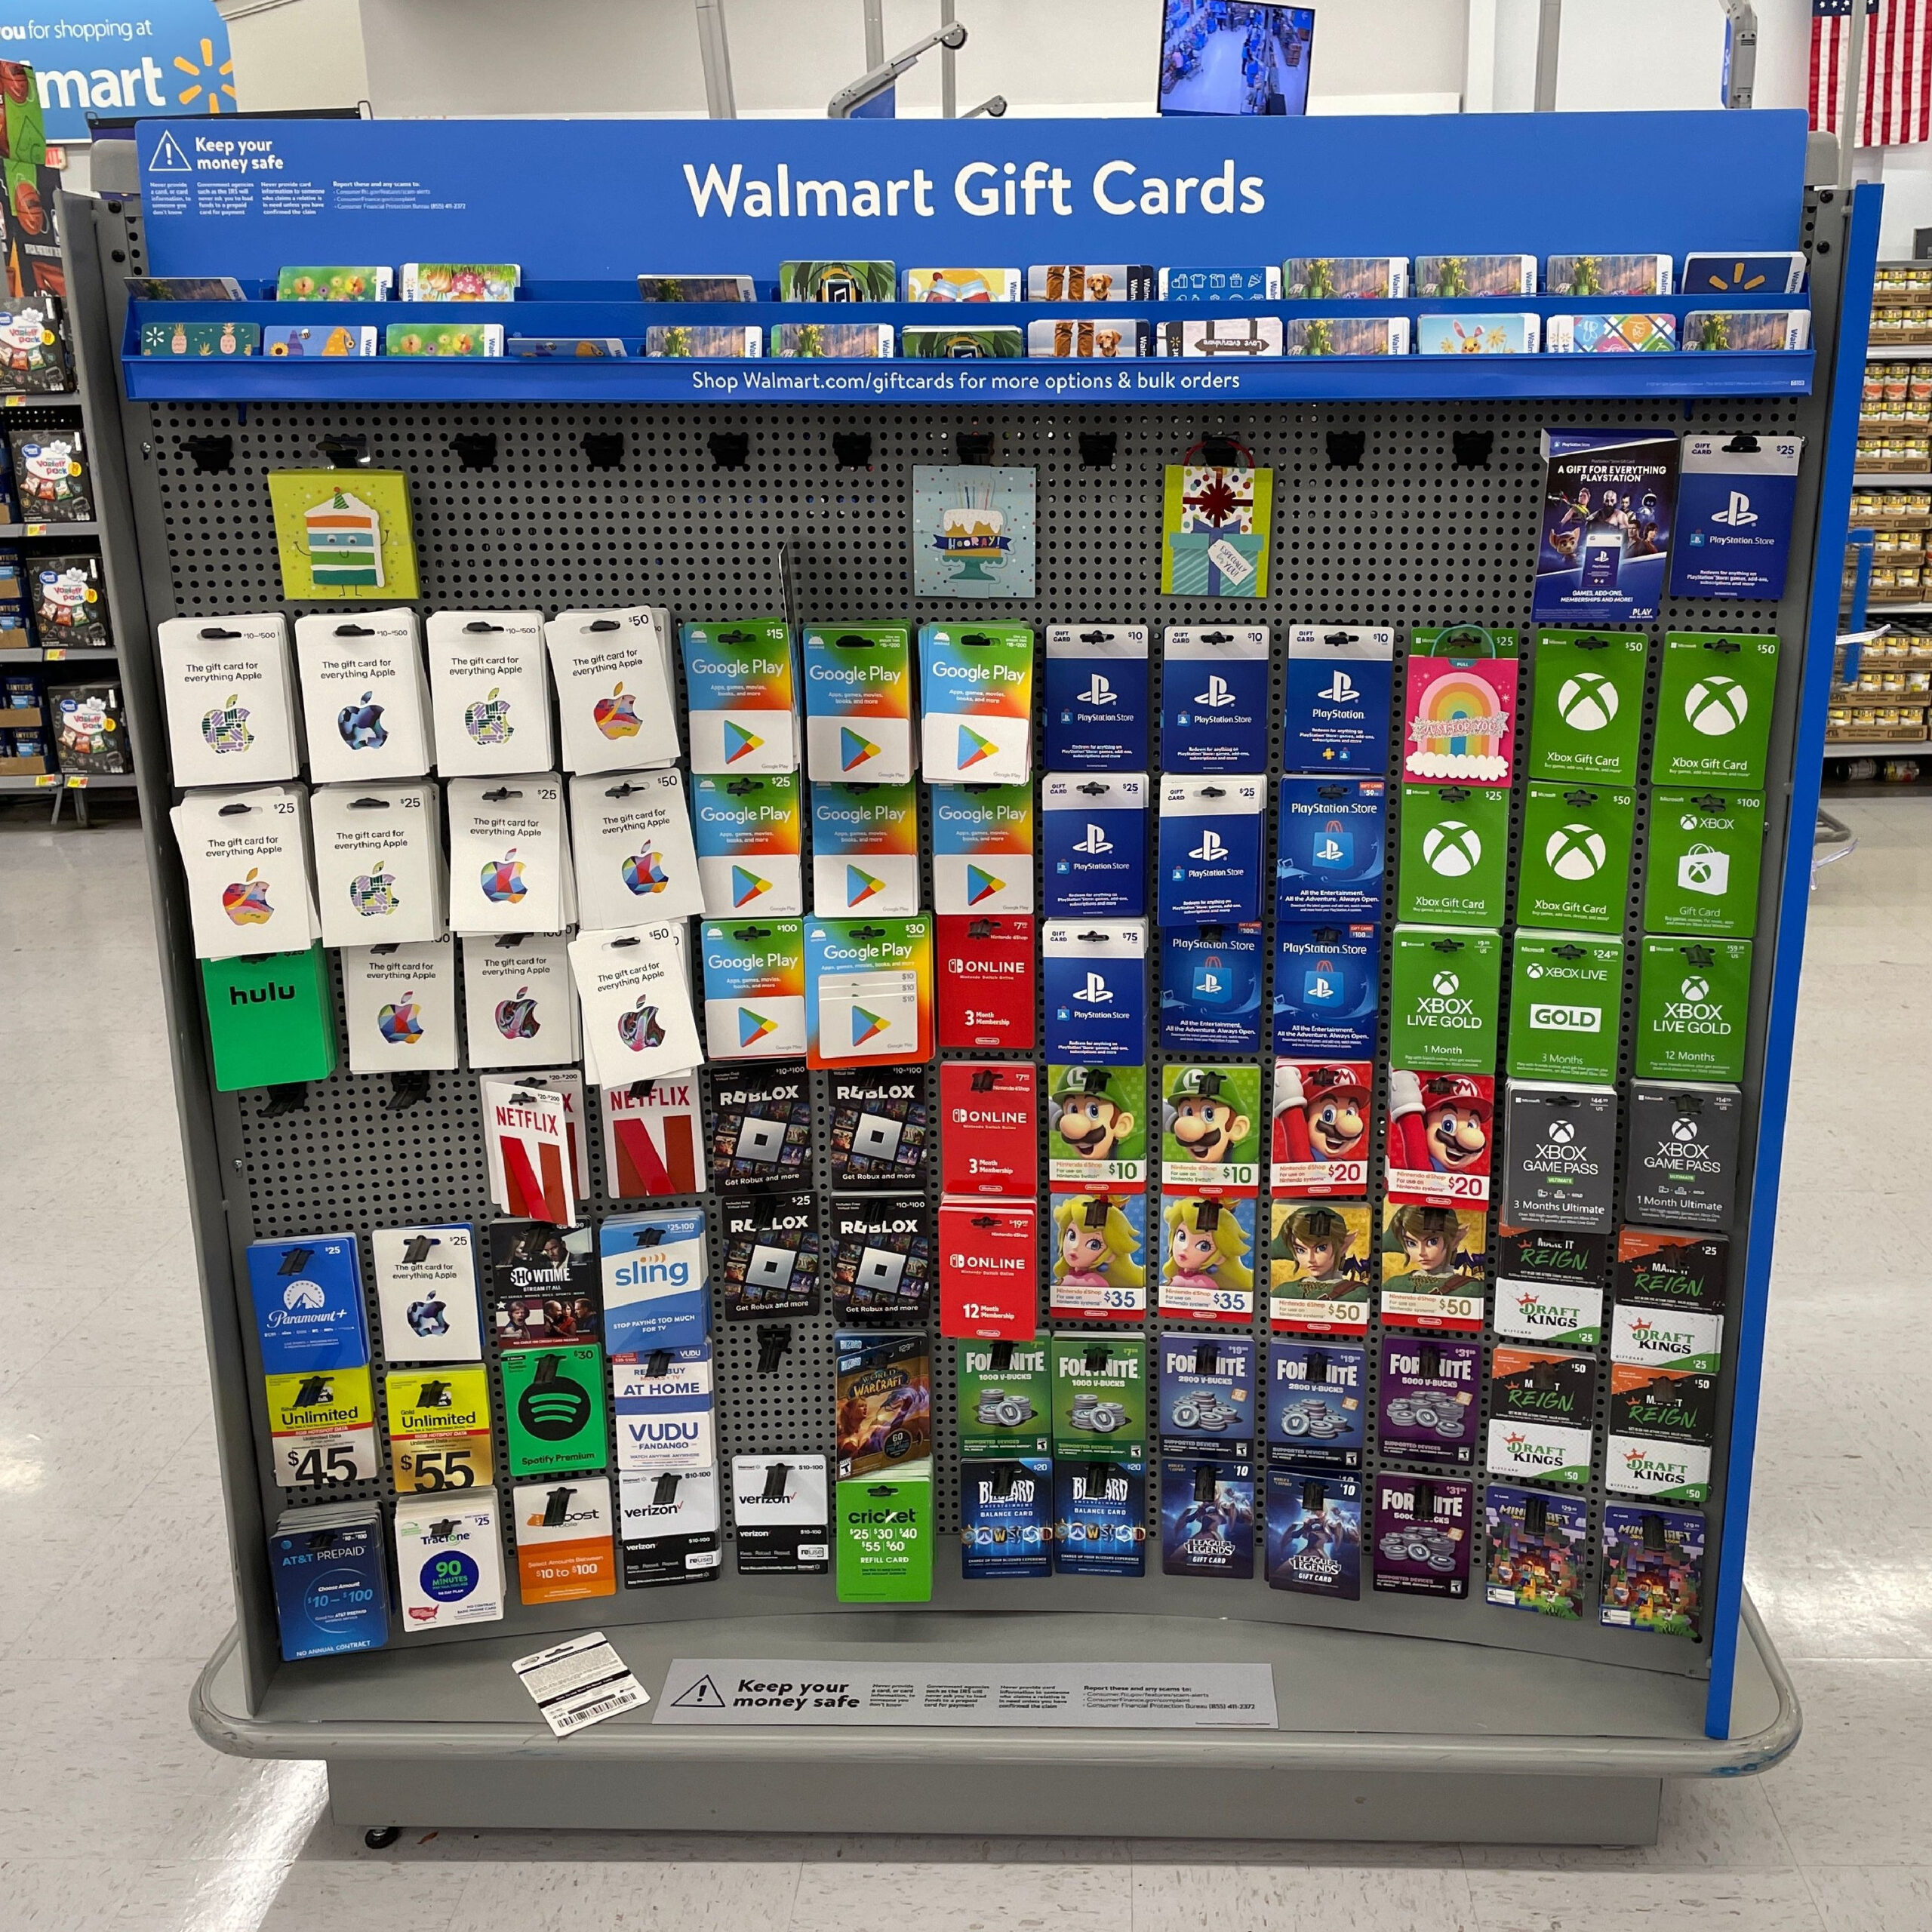 Walmart Must Pay Customers $4M After Gift Card Scheme–Find Out How To